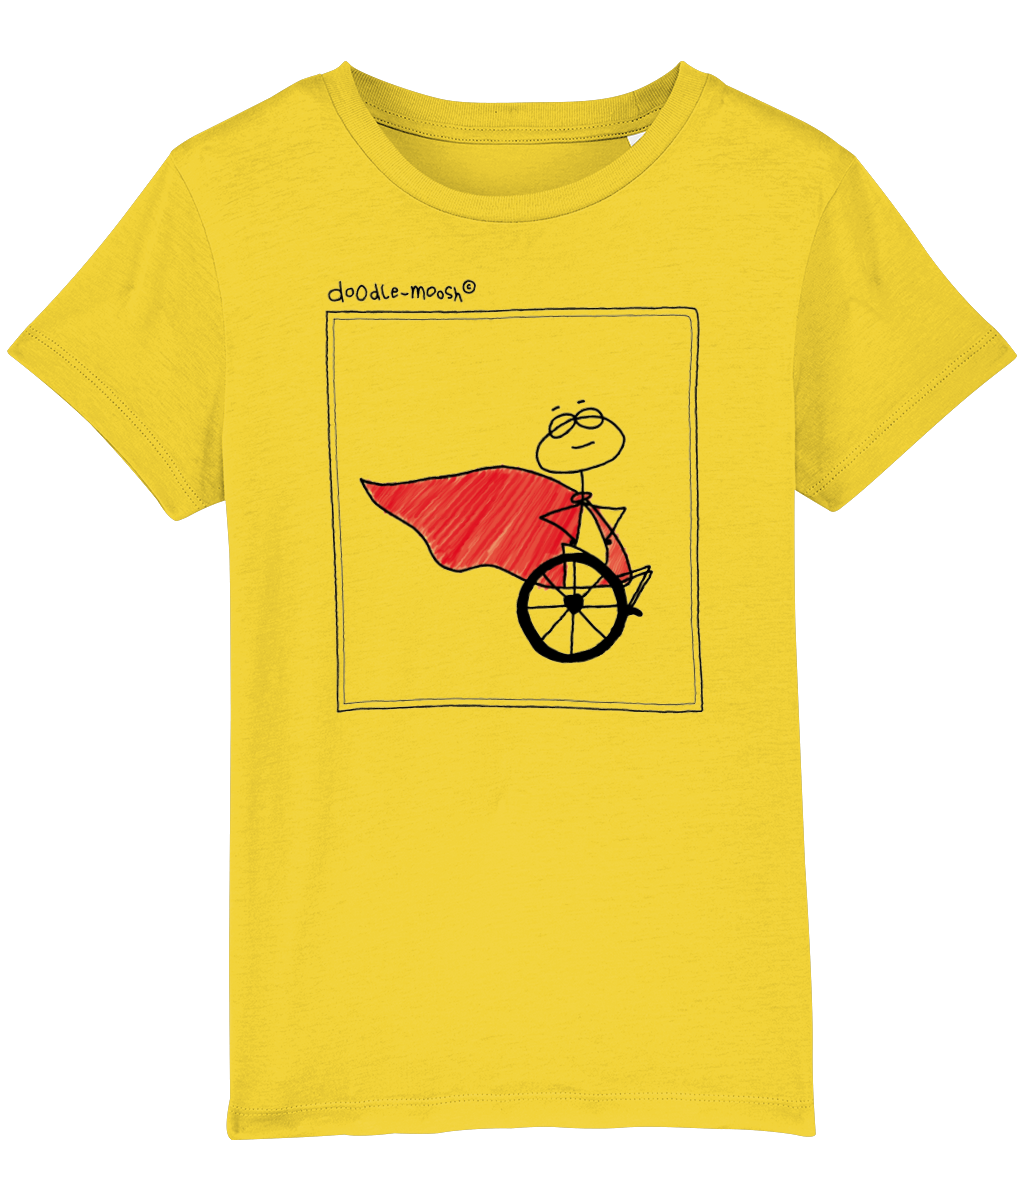 superpower t-shirt, yellow with black, colorful drawing